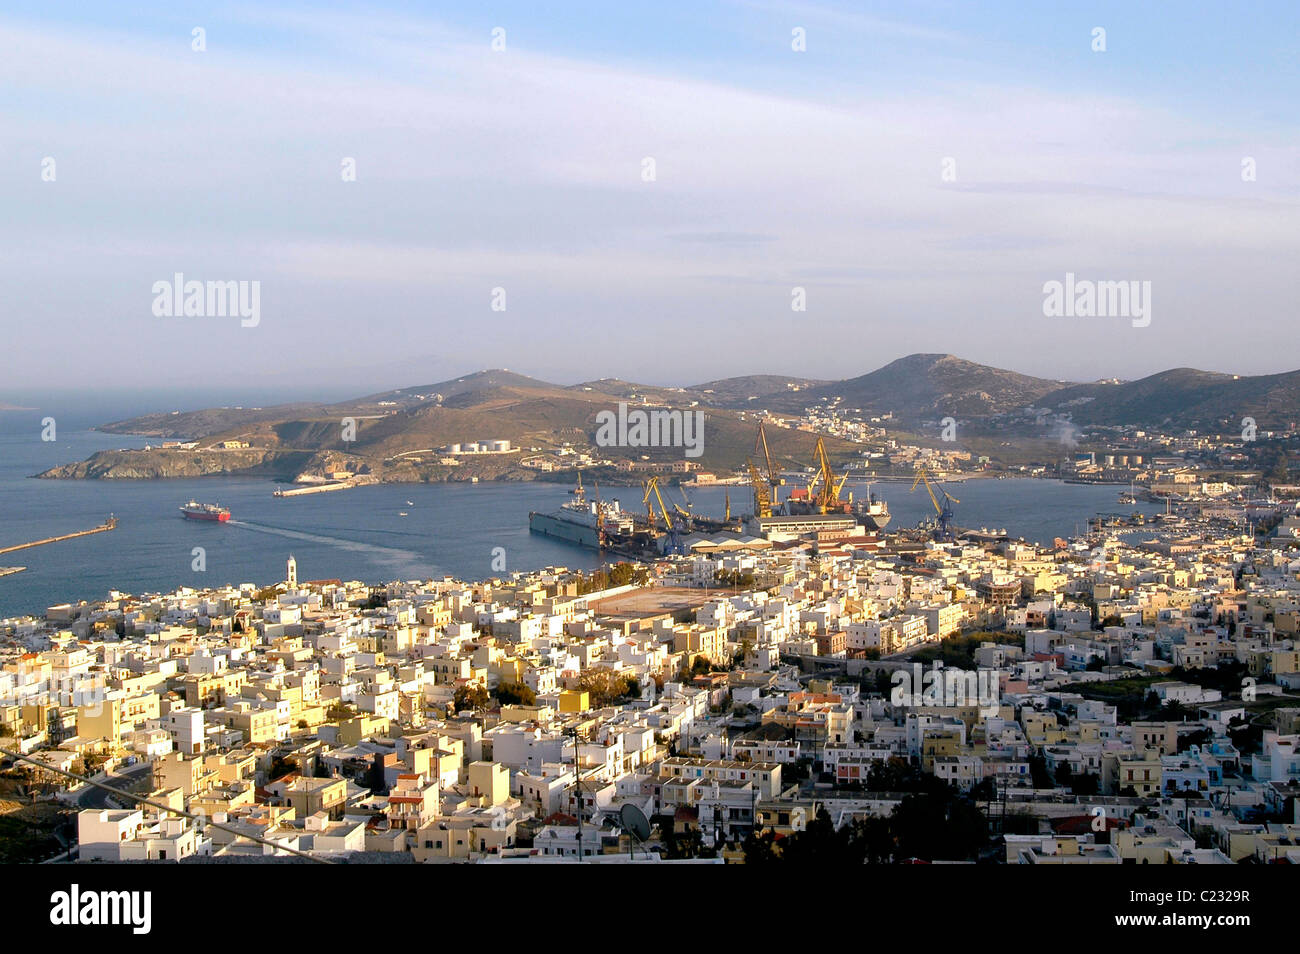 View of Hermoupolis, the capital of Cyclades Island from Ano Syros Stock Photo